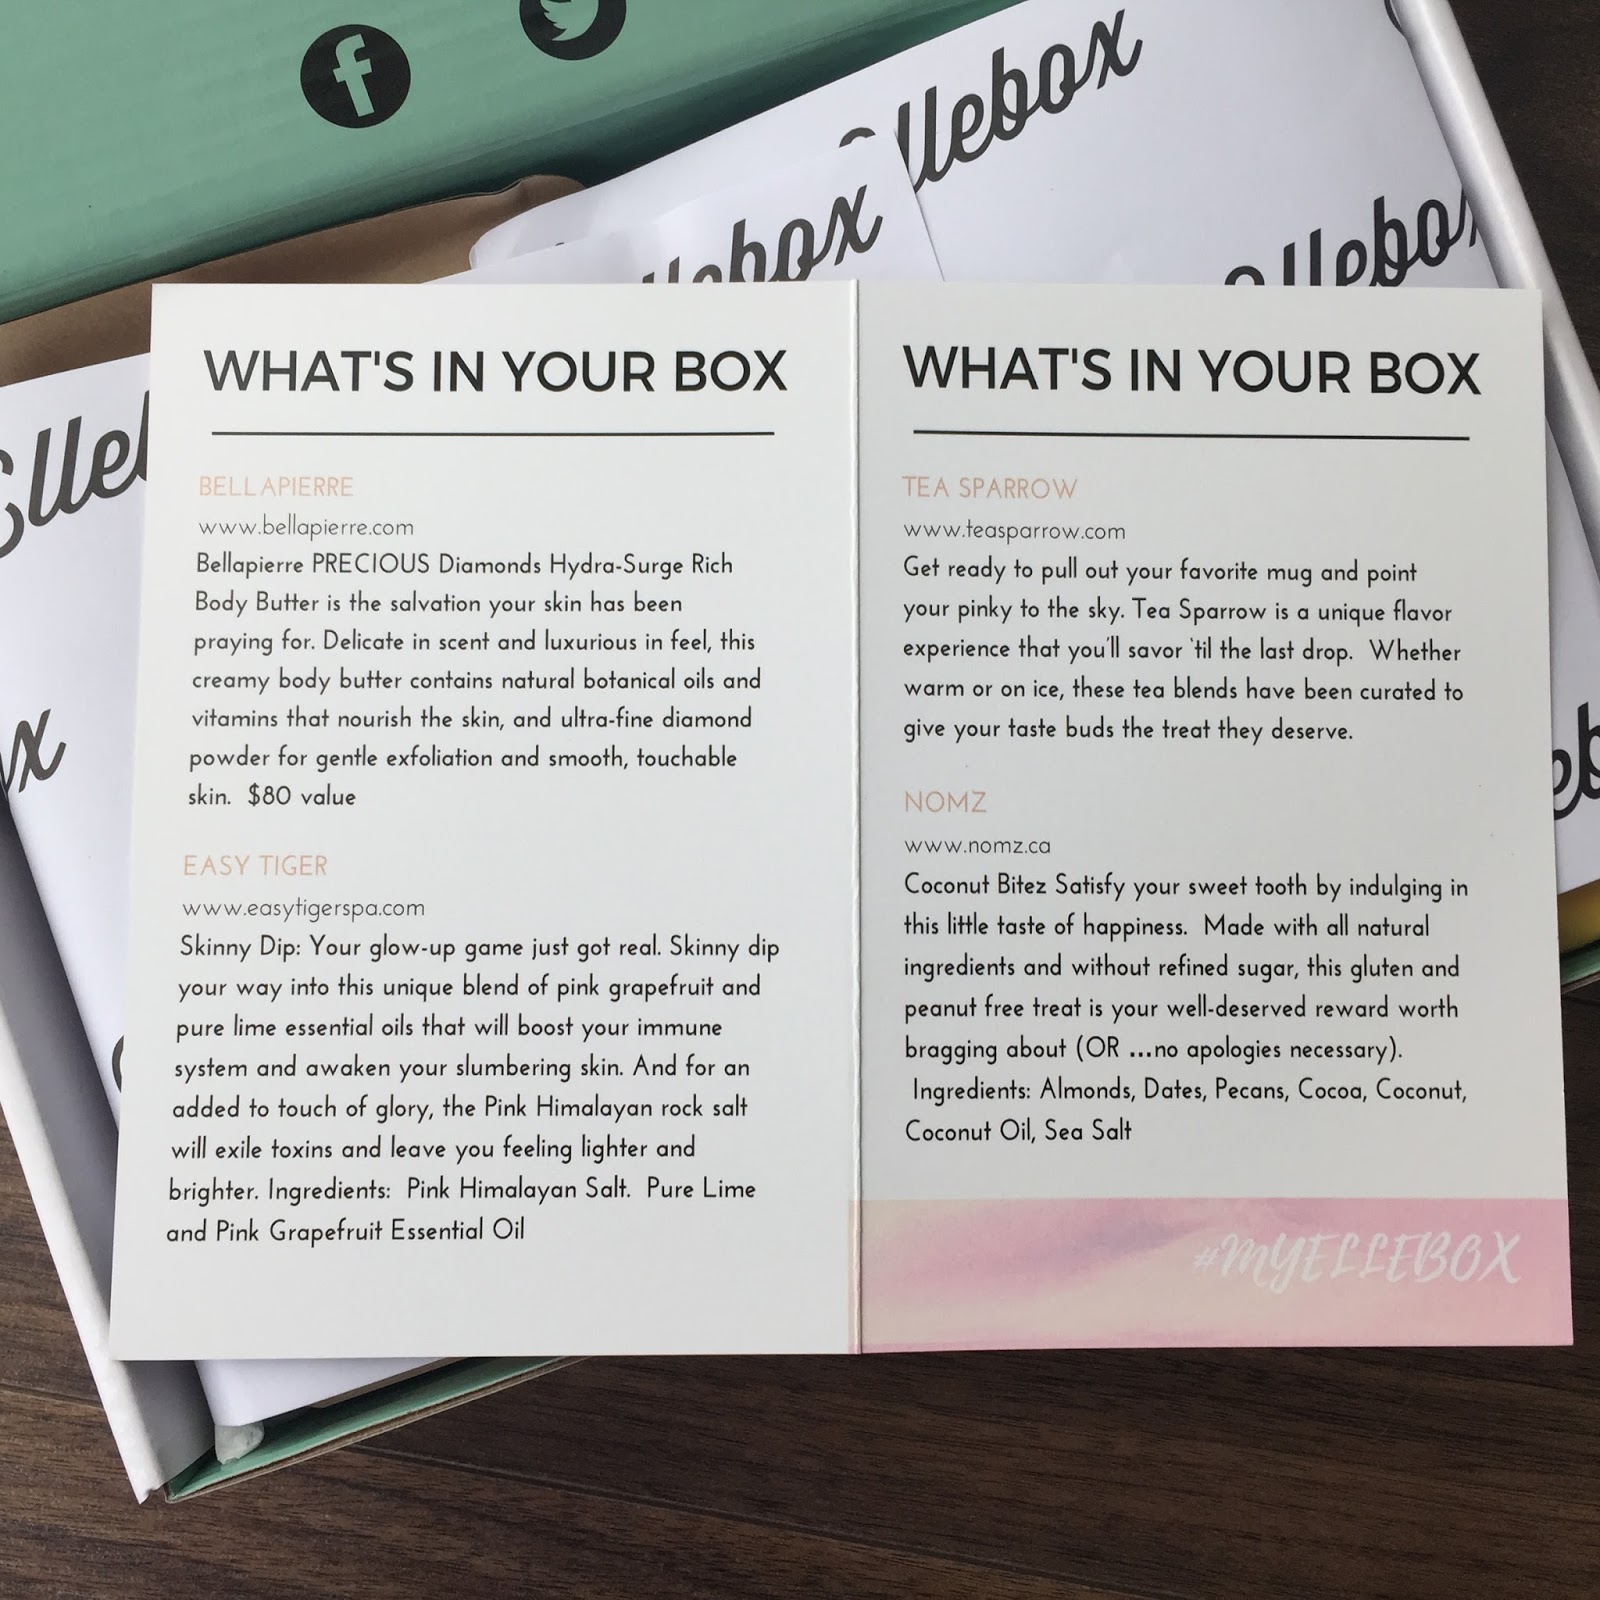 ElleBox-Whats-In-Your-Box